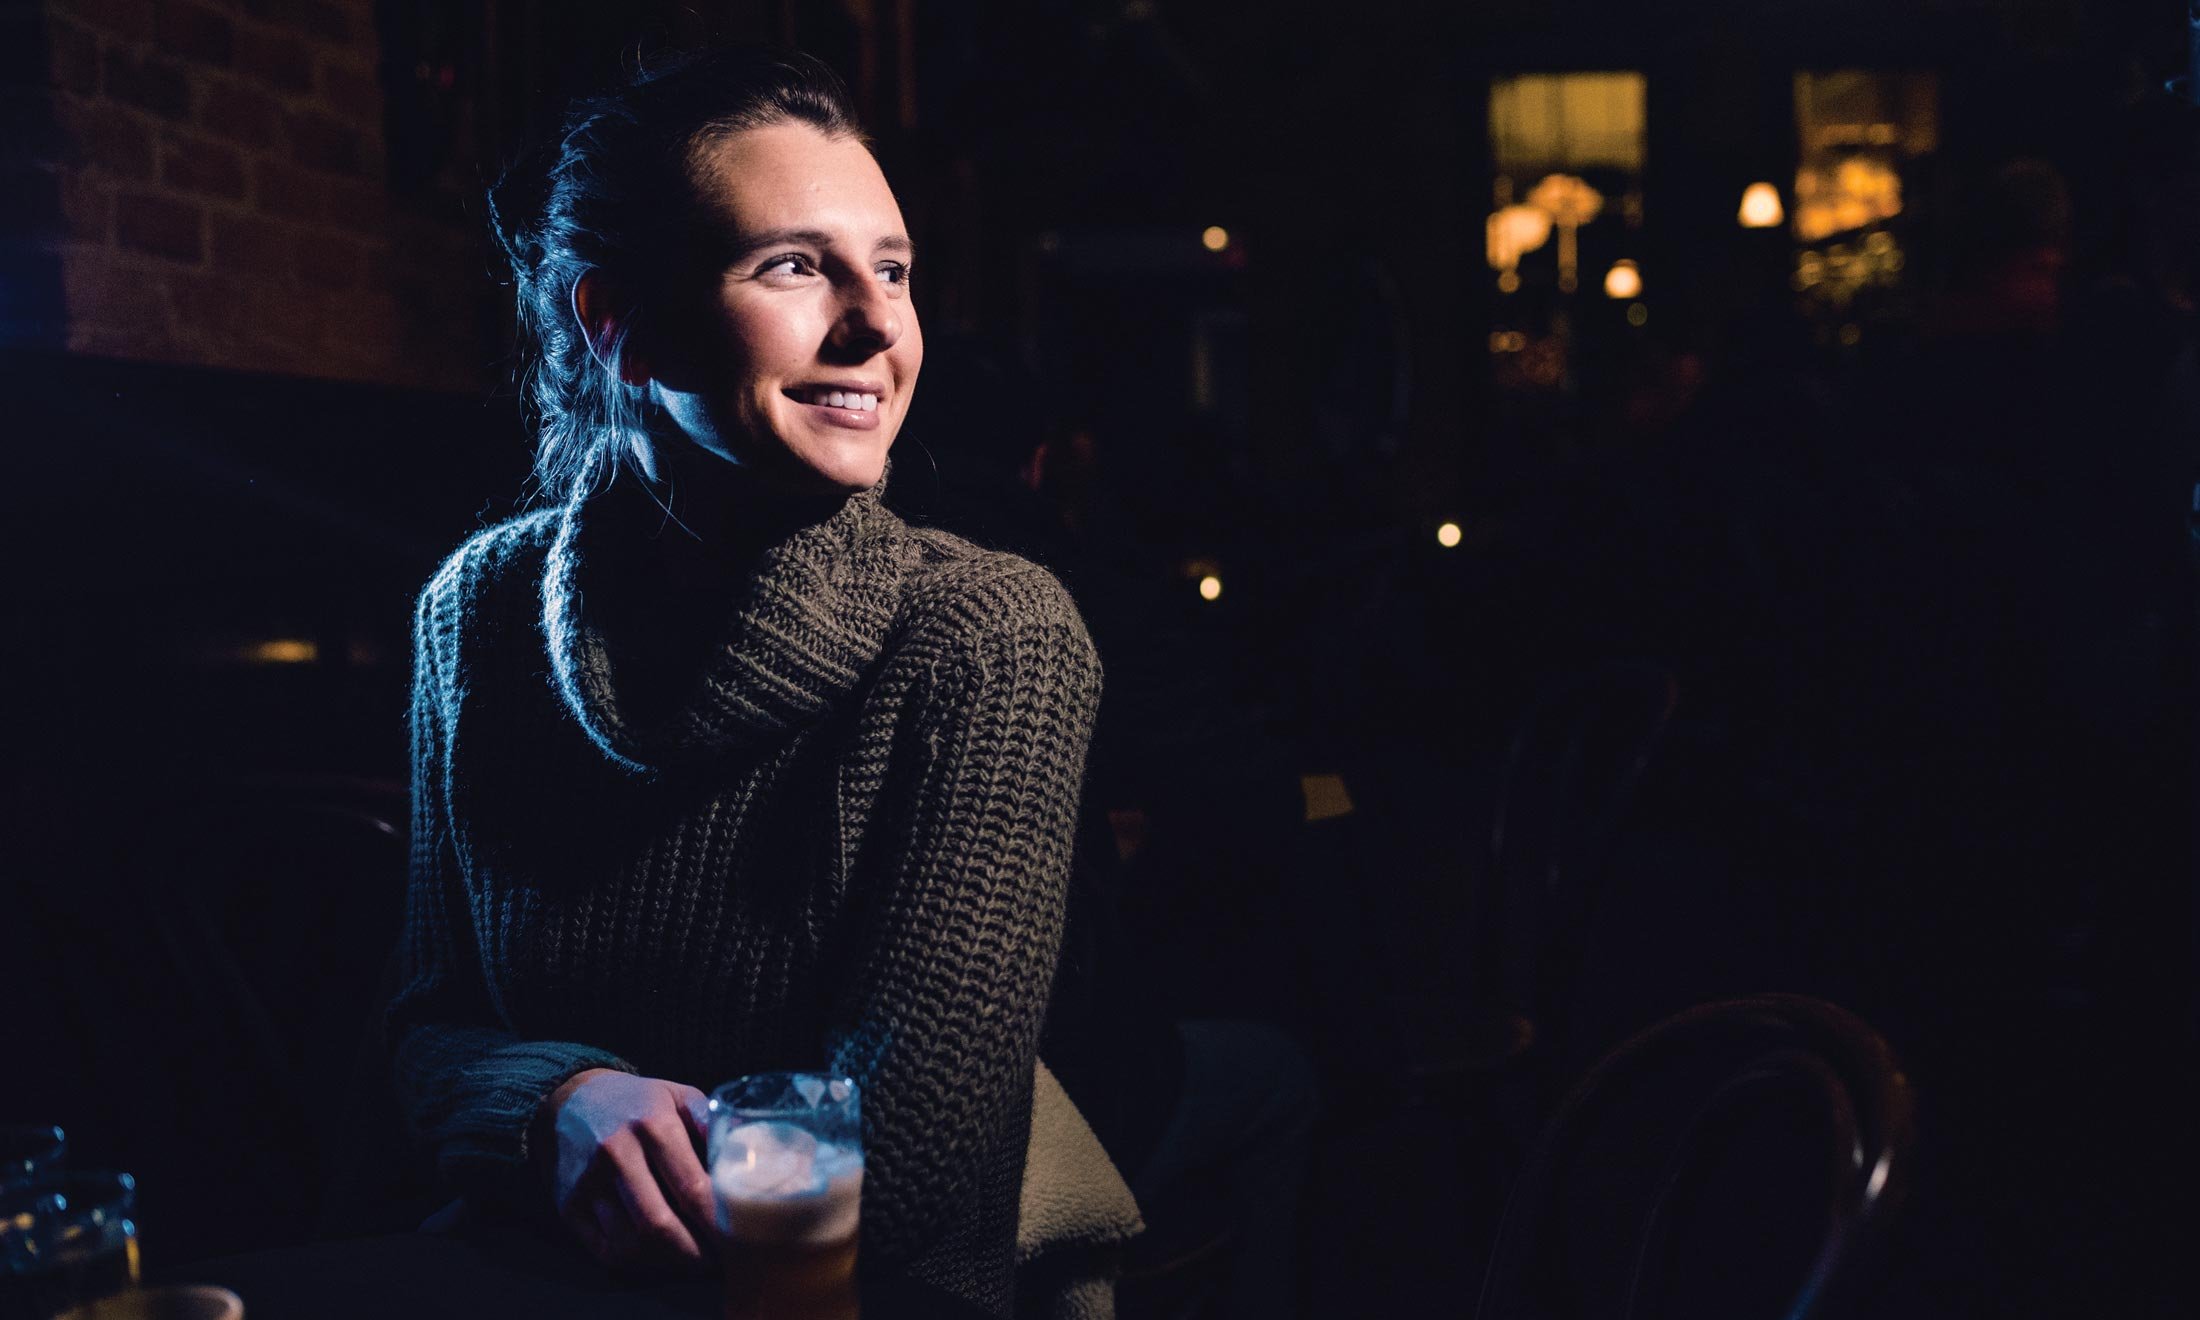 Oakland University alumna Hillary Sawchuck, creator of 'A Drink With,' has a drink at Sugar House in Detroit, with a dark and blurry view of the pub interior in the background.